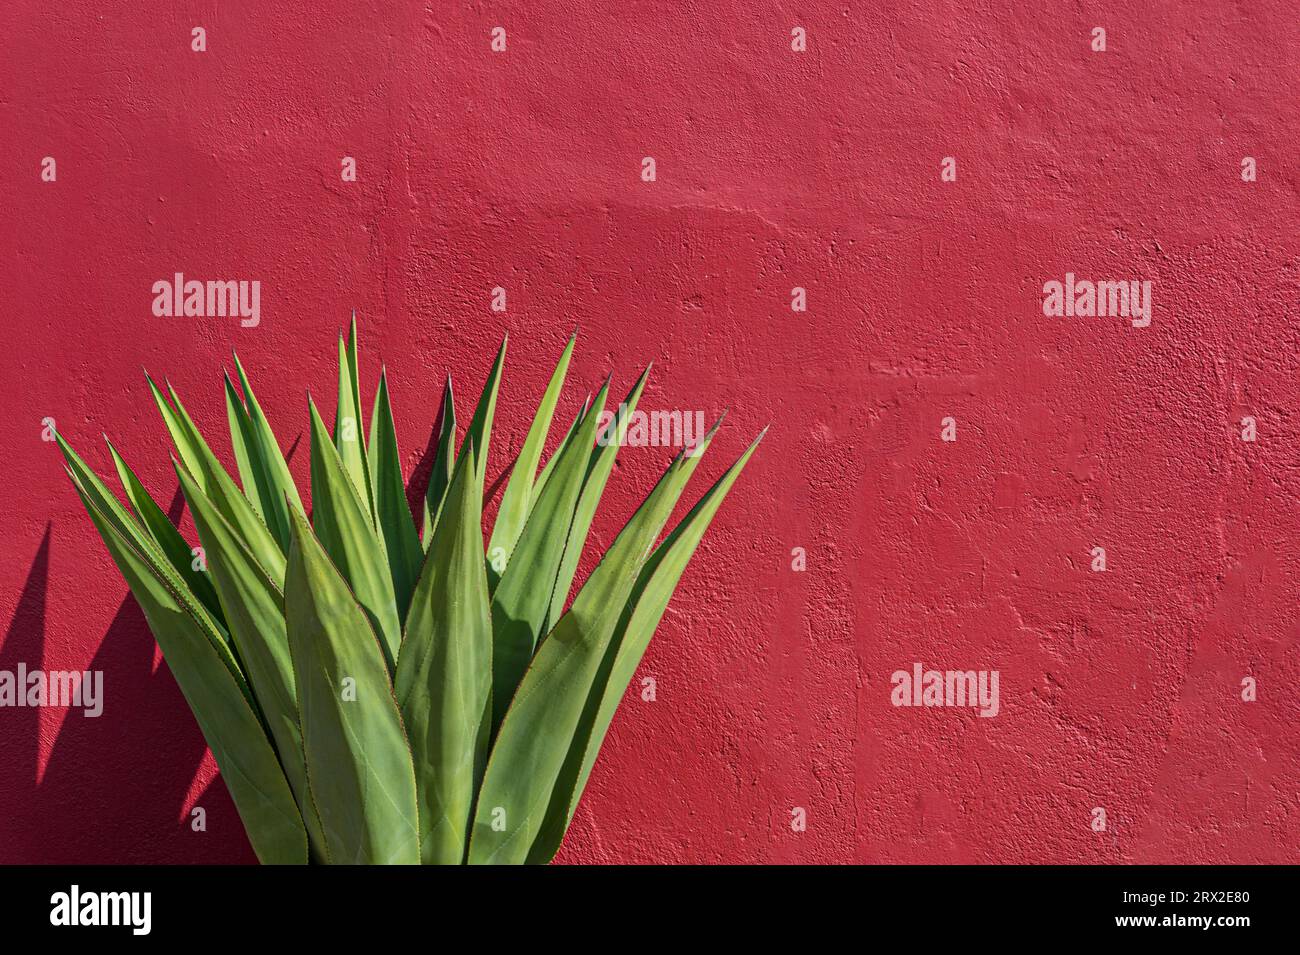 Agave plant against red stucco wall Stock Photo